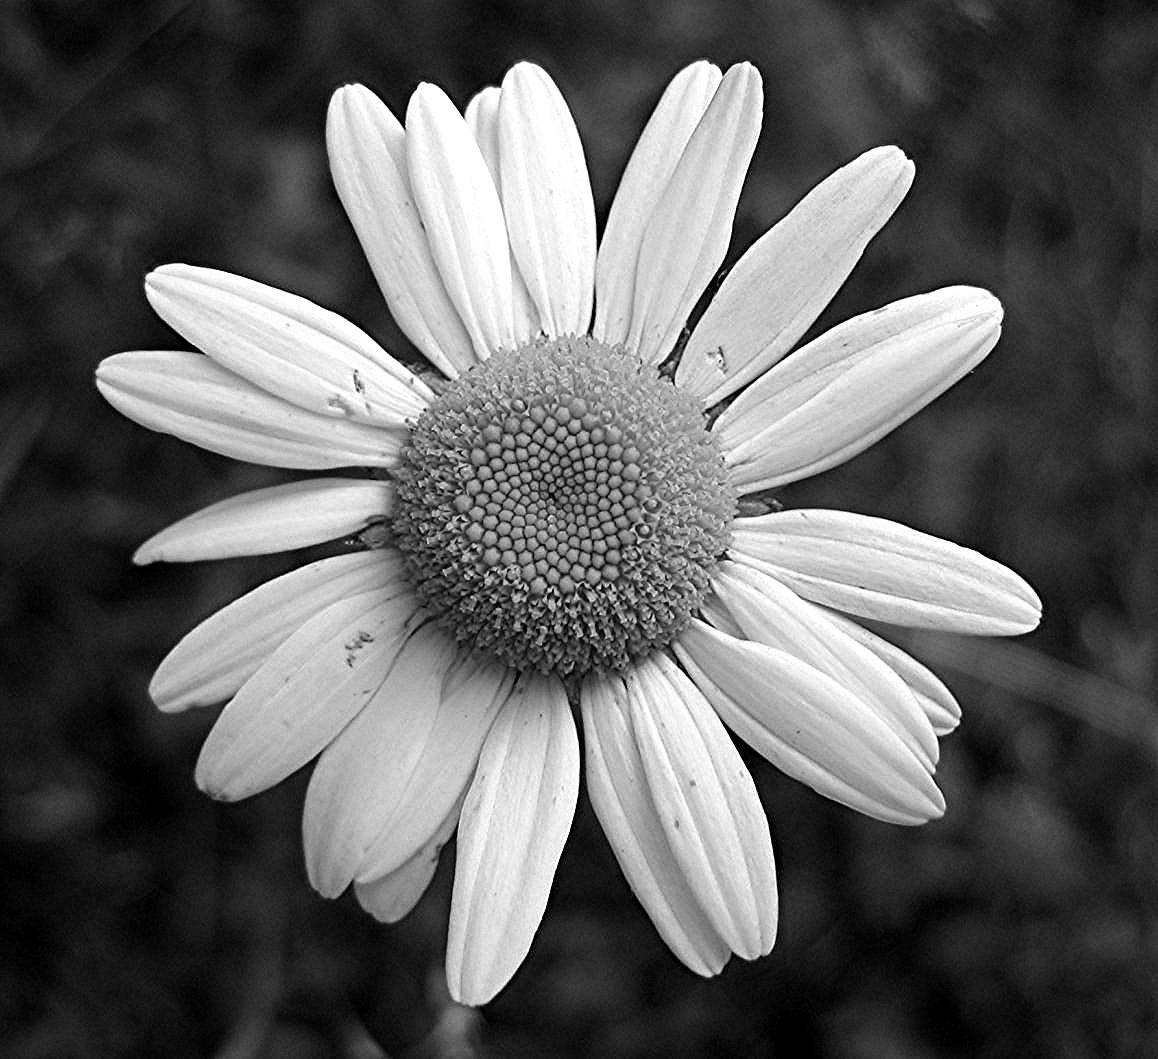 Black And White Daisy Tumblr Wallpapers - Wallpaper Cave